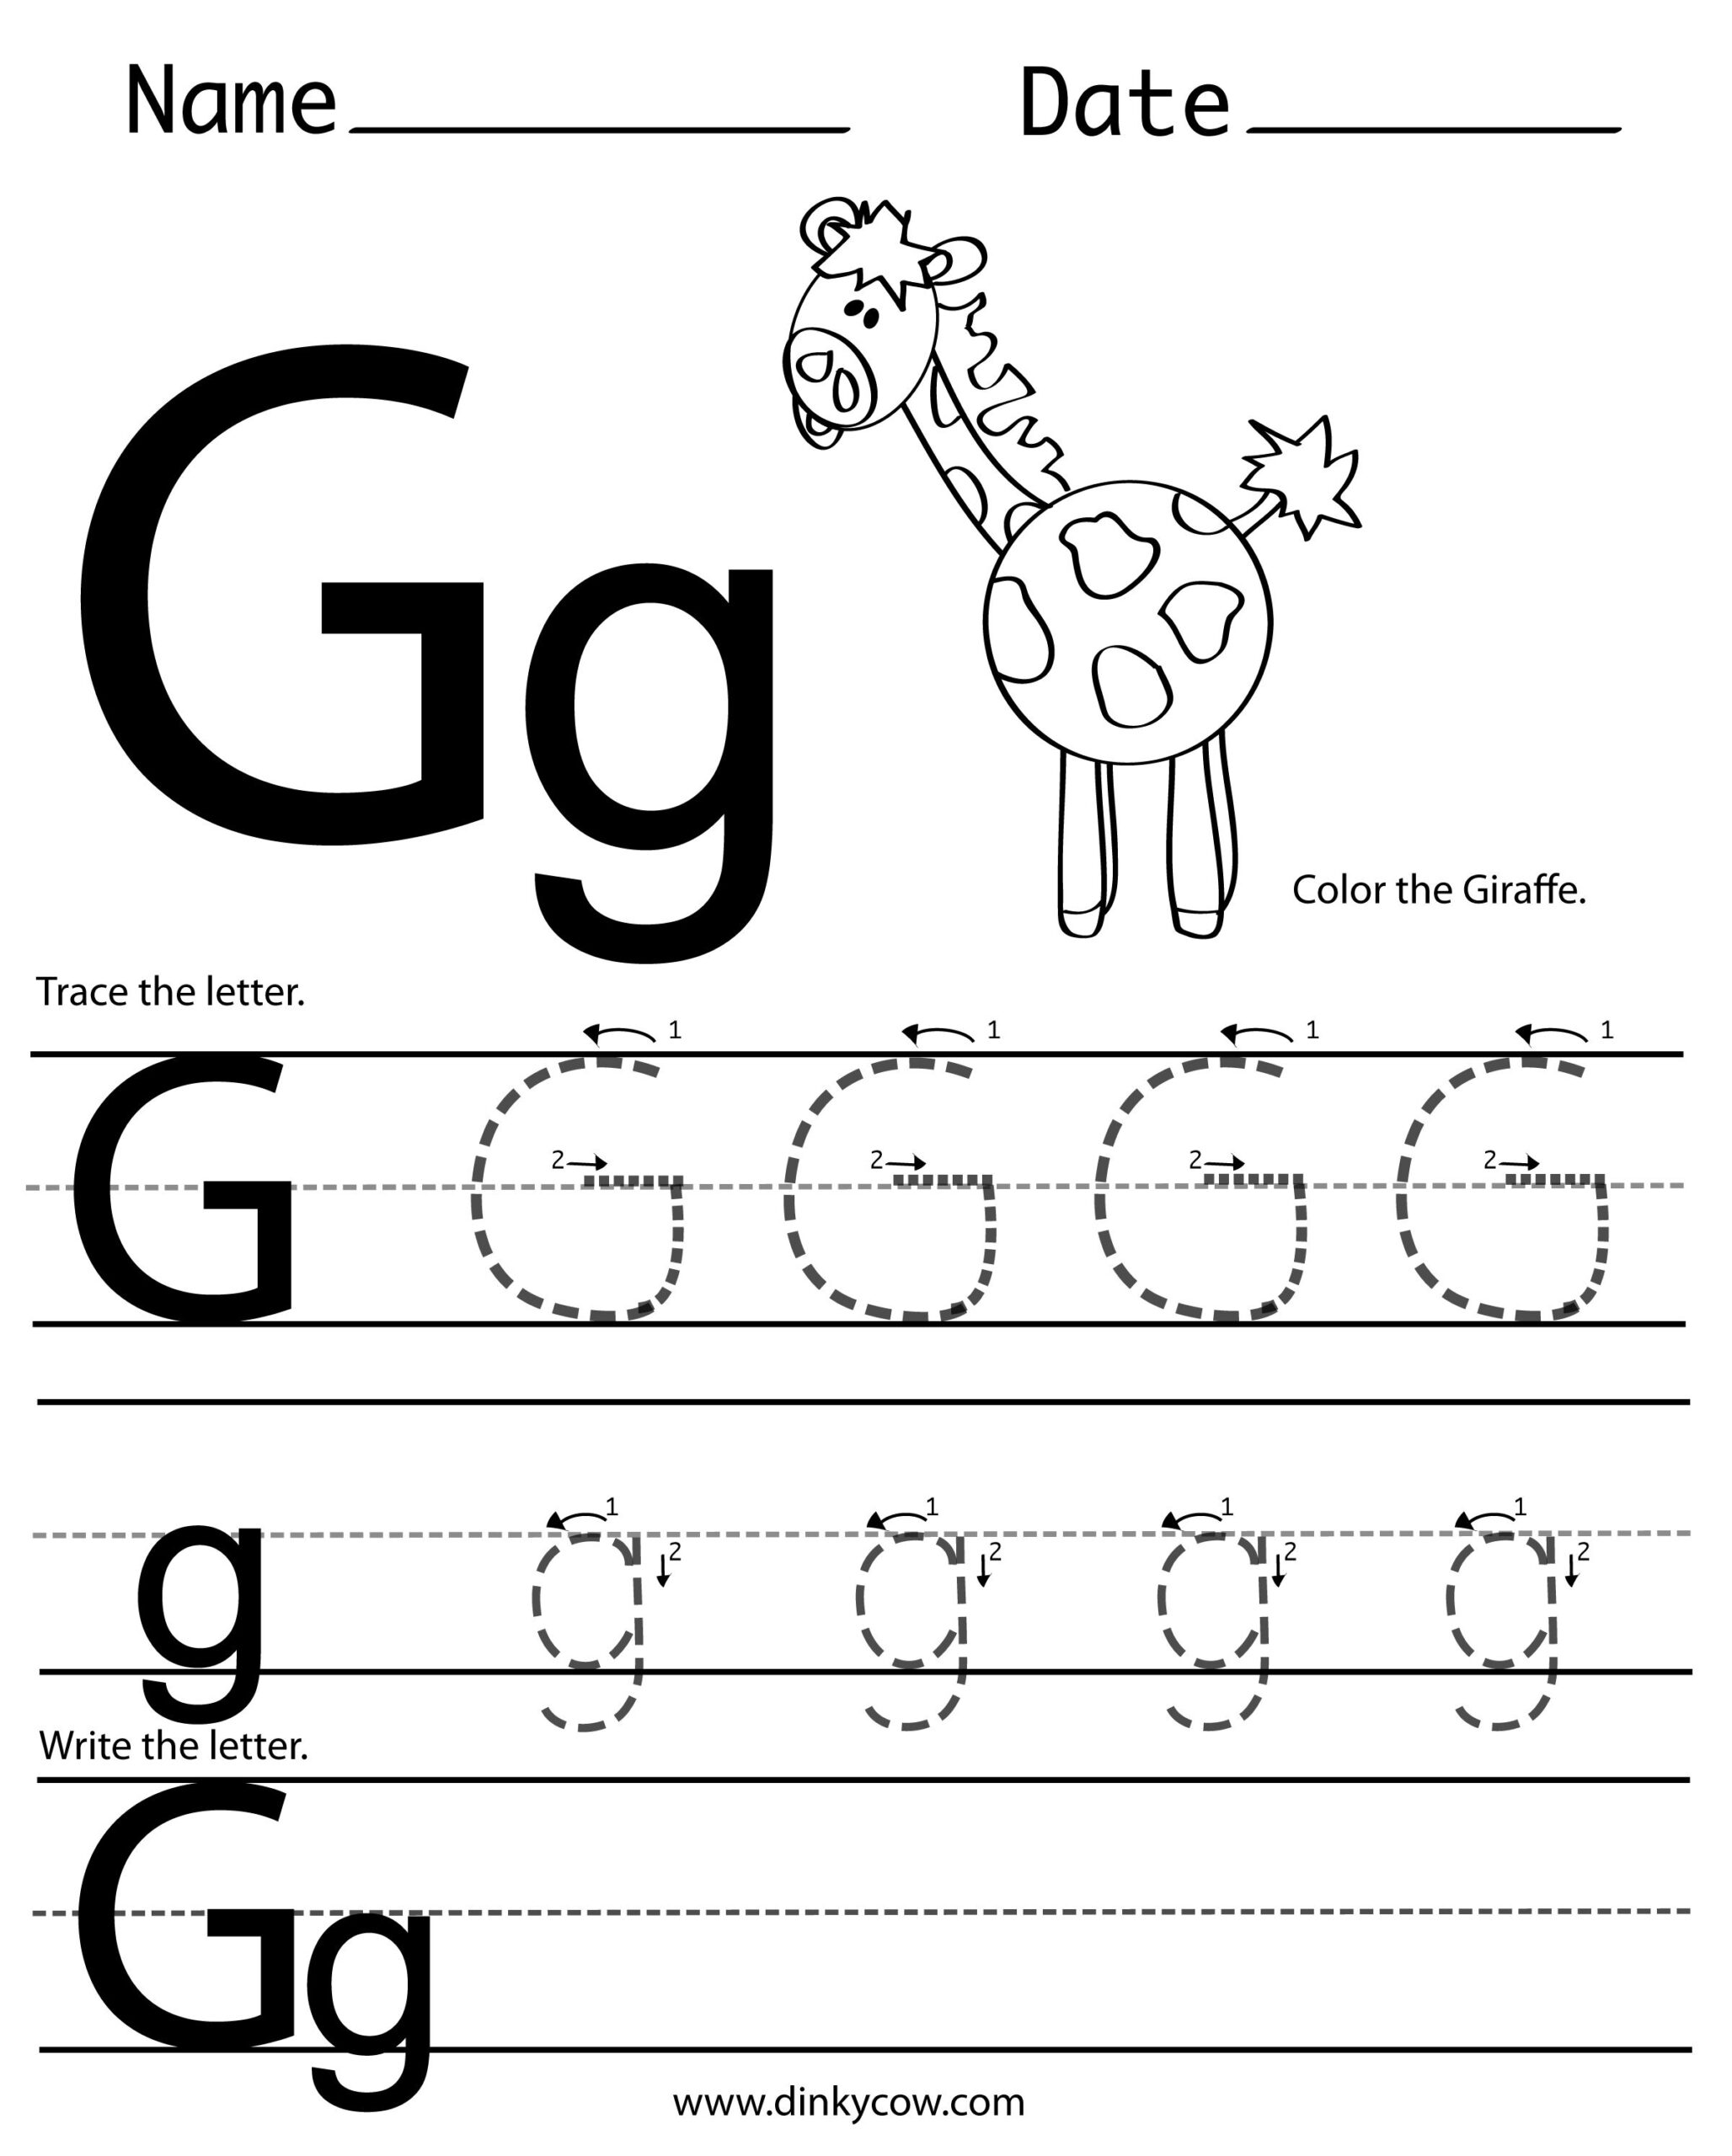 Free Letter G Tracing Worksheets Lowercase Letter G Tracing Worksheets For Preschool Name 